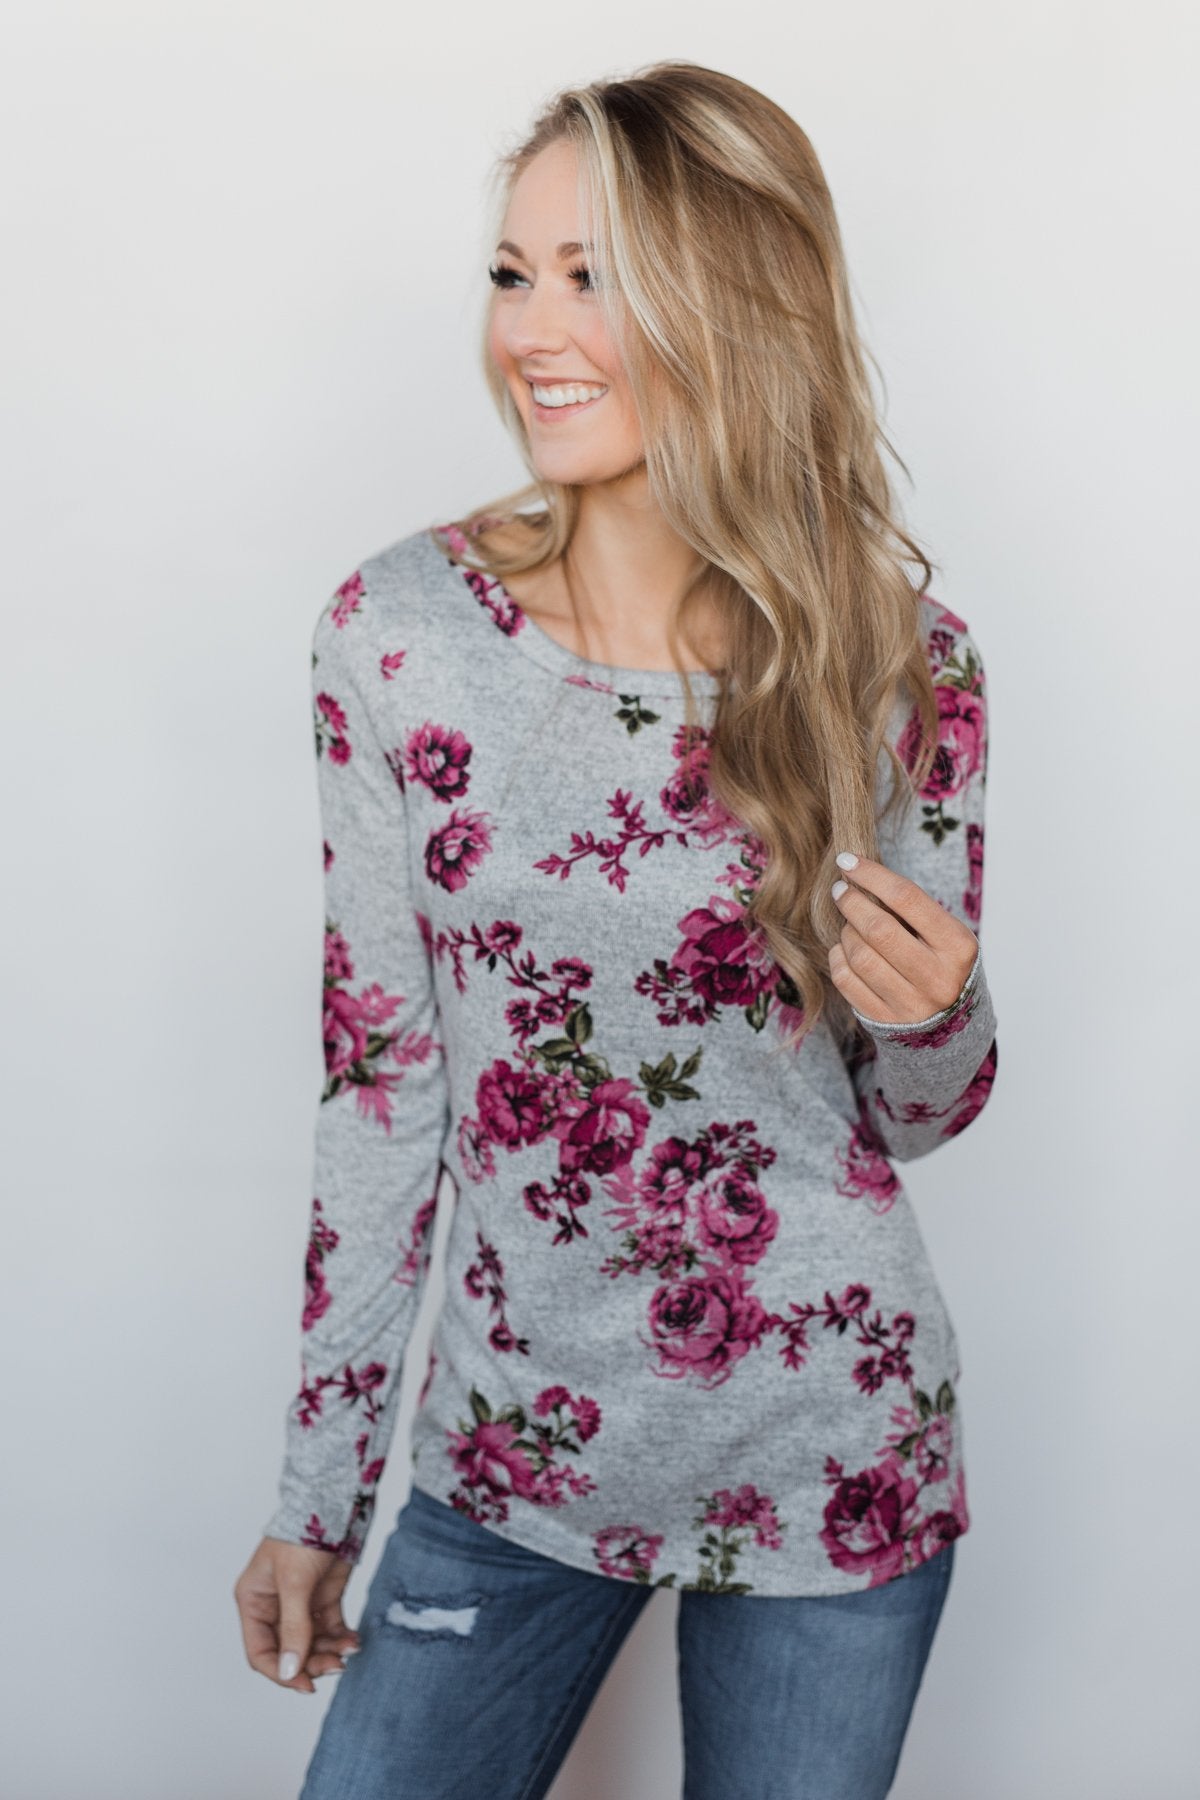 Love's in the Air Floral Pullover Top- Grey & Pink